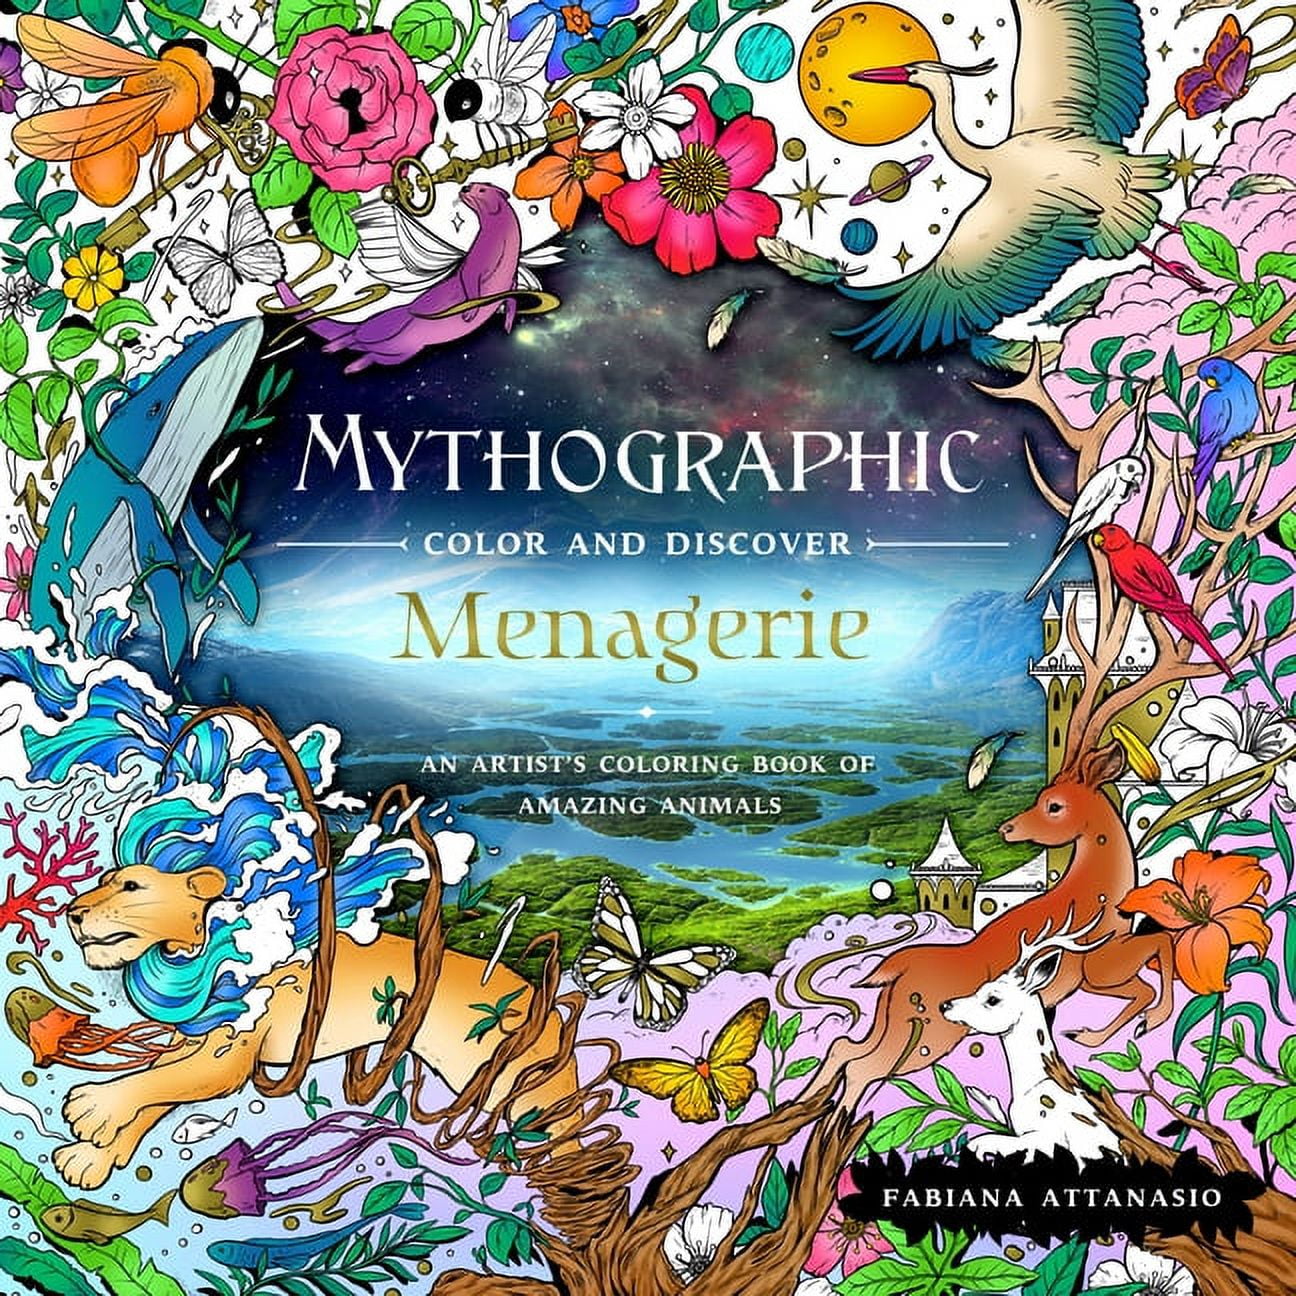 Mythographic Color and Discover: Menagerie: An Artist's Coloring Book of Amazing Animals [Book]